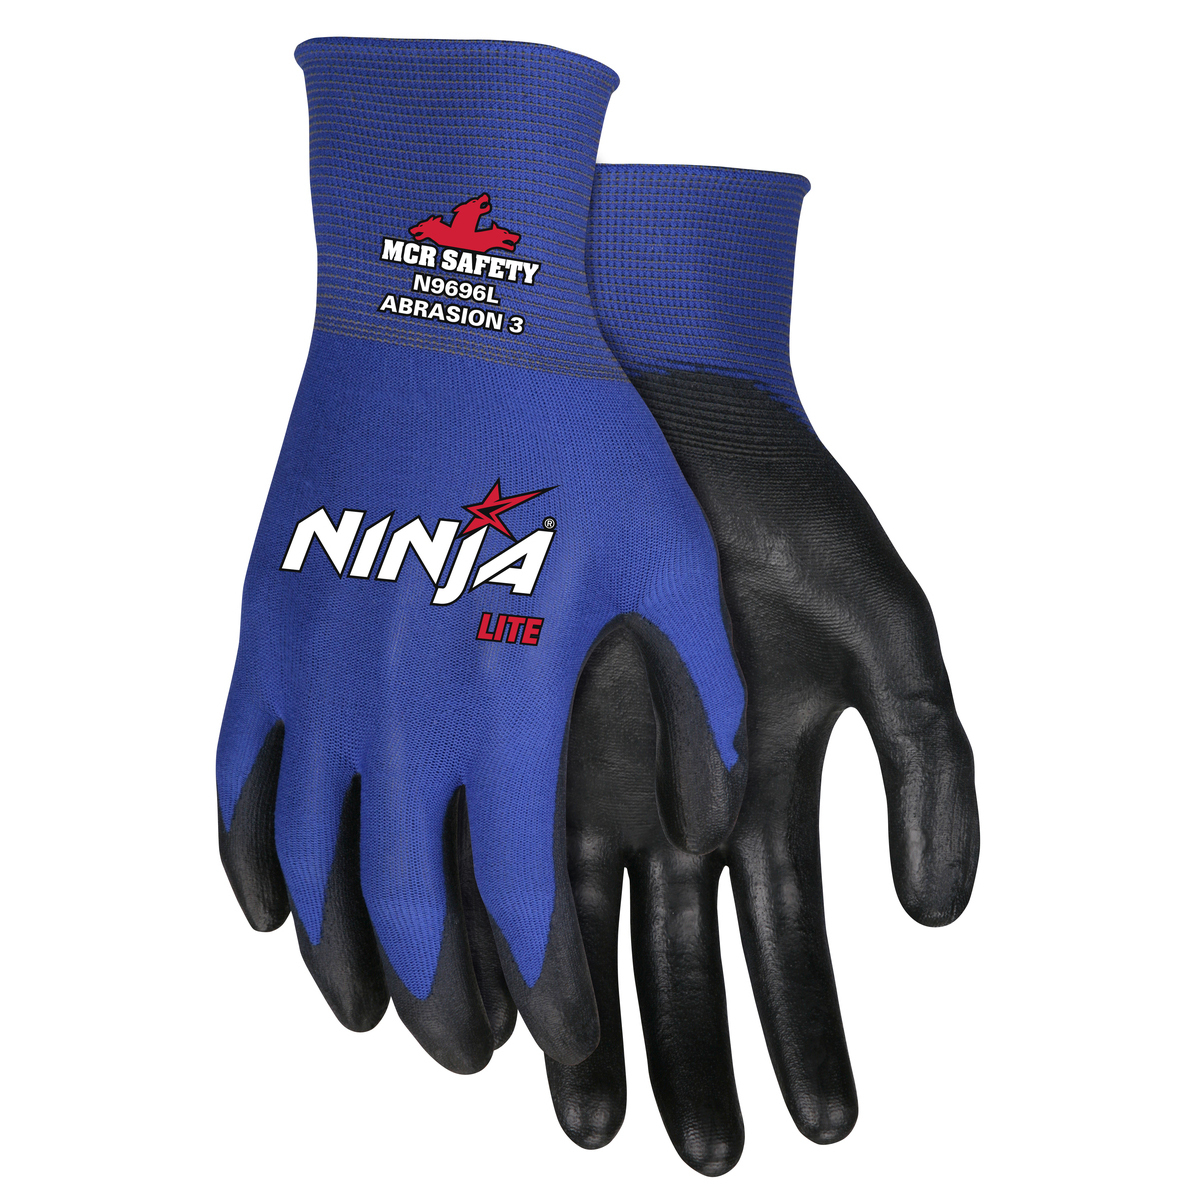 MCR Safety® X-Large Ninja® Lite 18 Gauge Black Latex Free Polyurethane Palm And Fingertips Coated Work Gloves With Blue Athletic